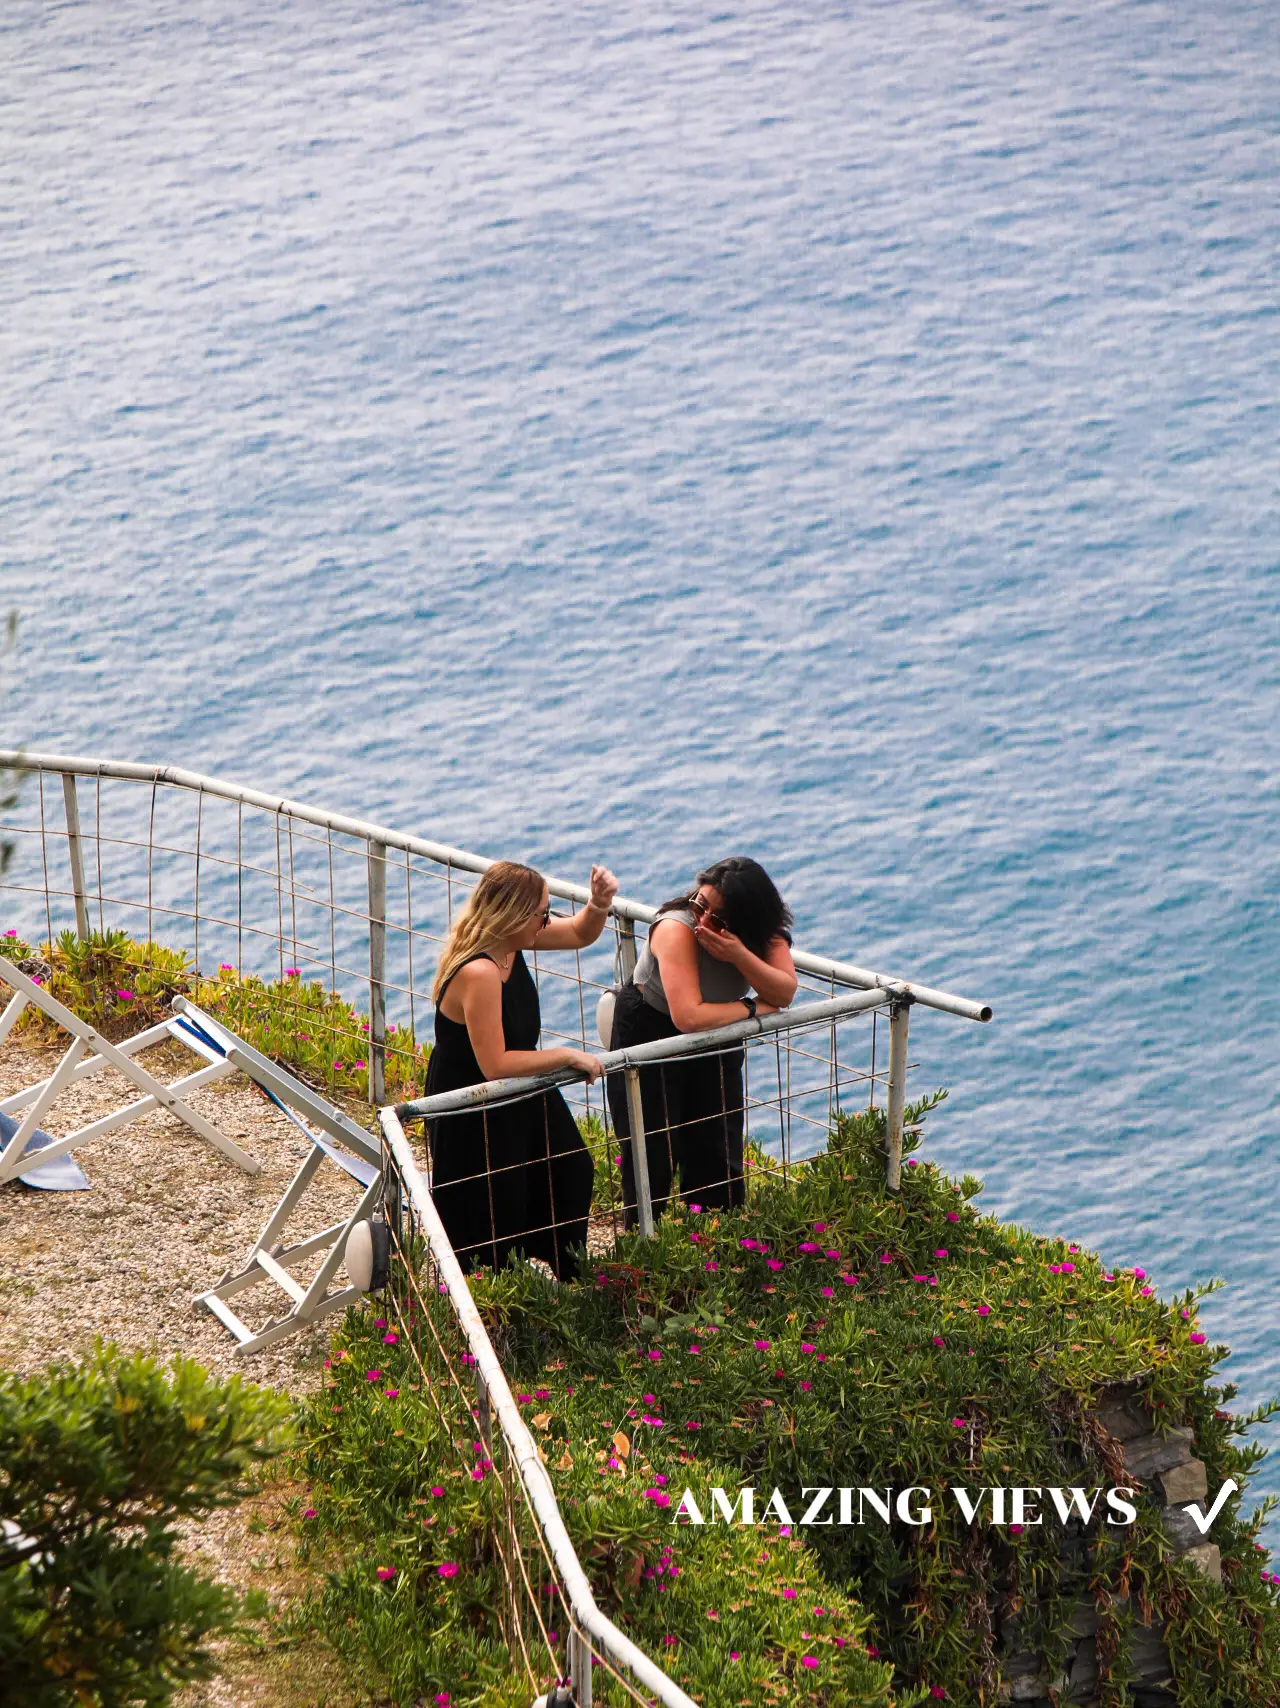  Two women are sitting on a railing overlooking the ocean.